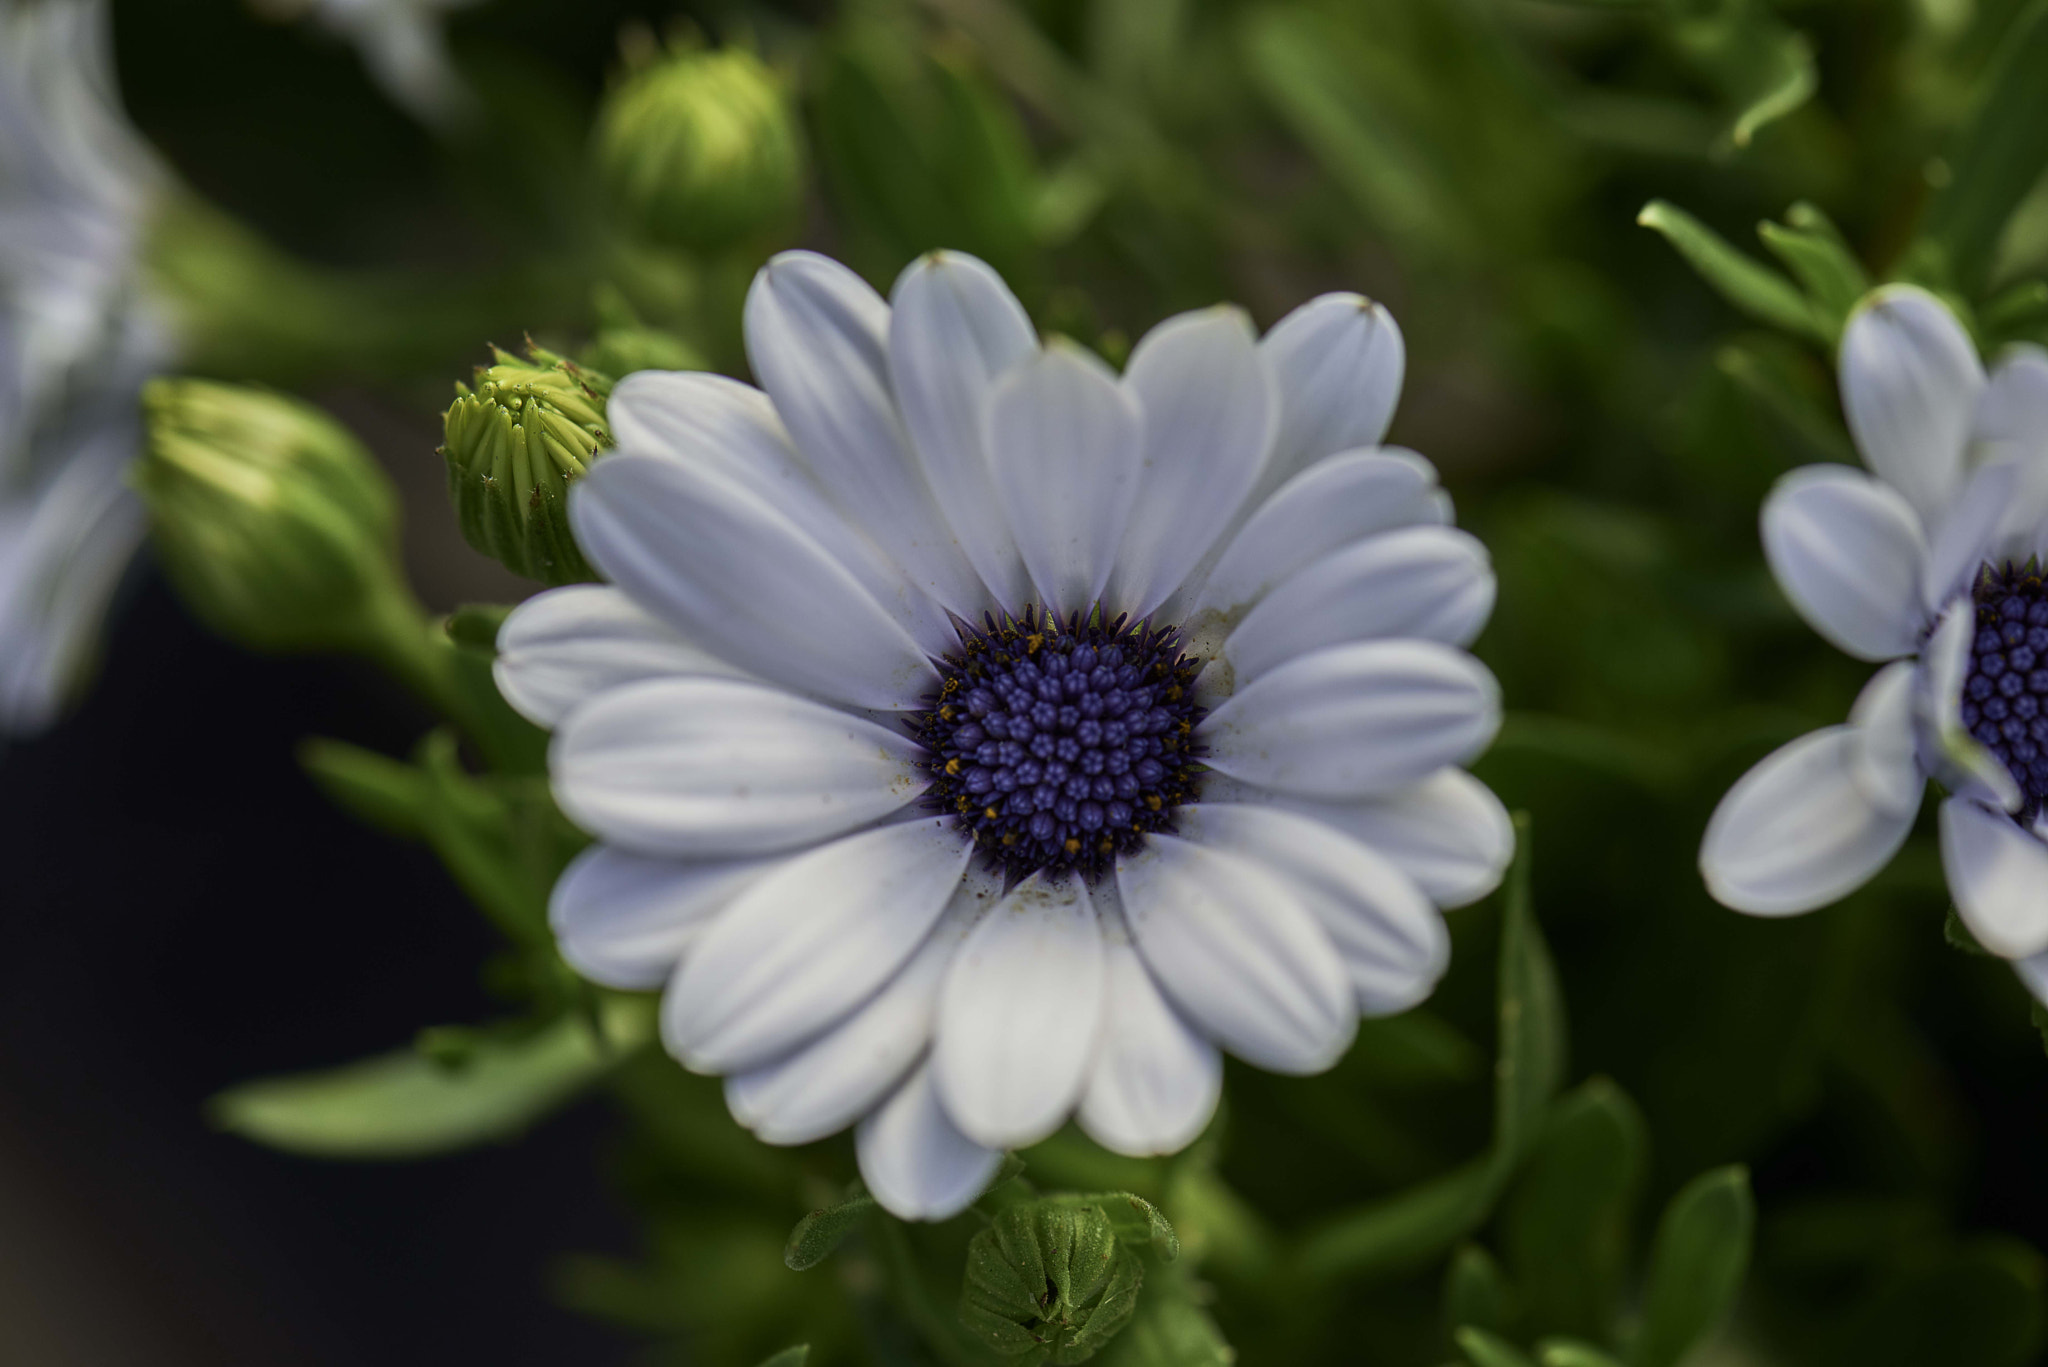 Nikon D800 + Nikon AF-S Micro-Nikkor 105mm F2.8G IF-ED VR sample photo. Unique daisy photography